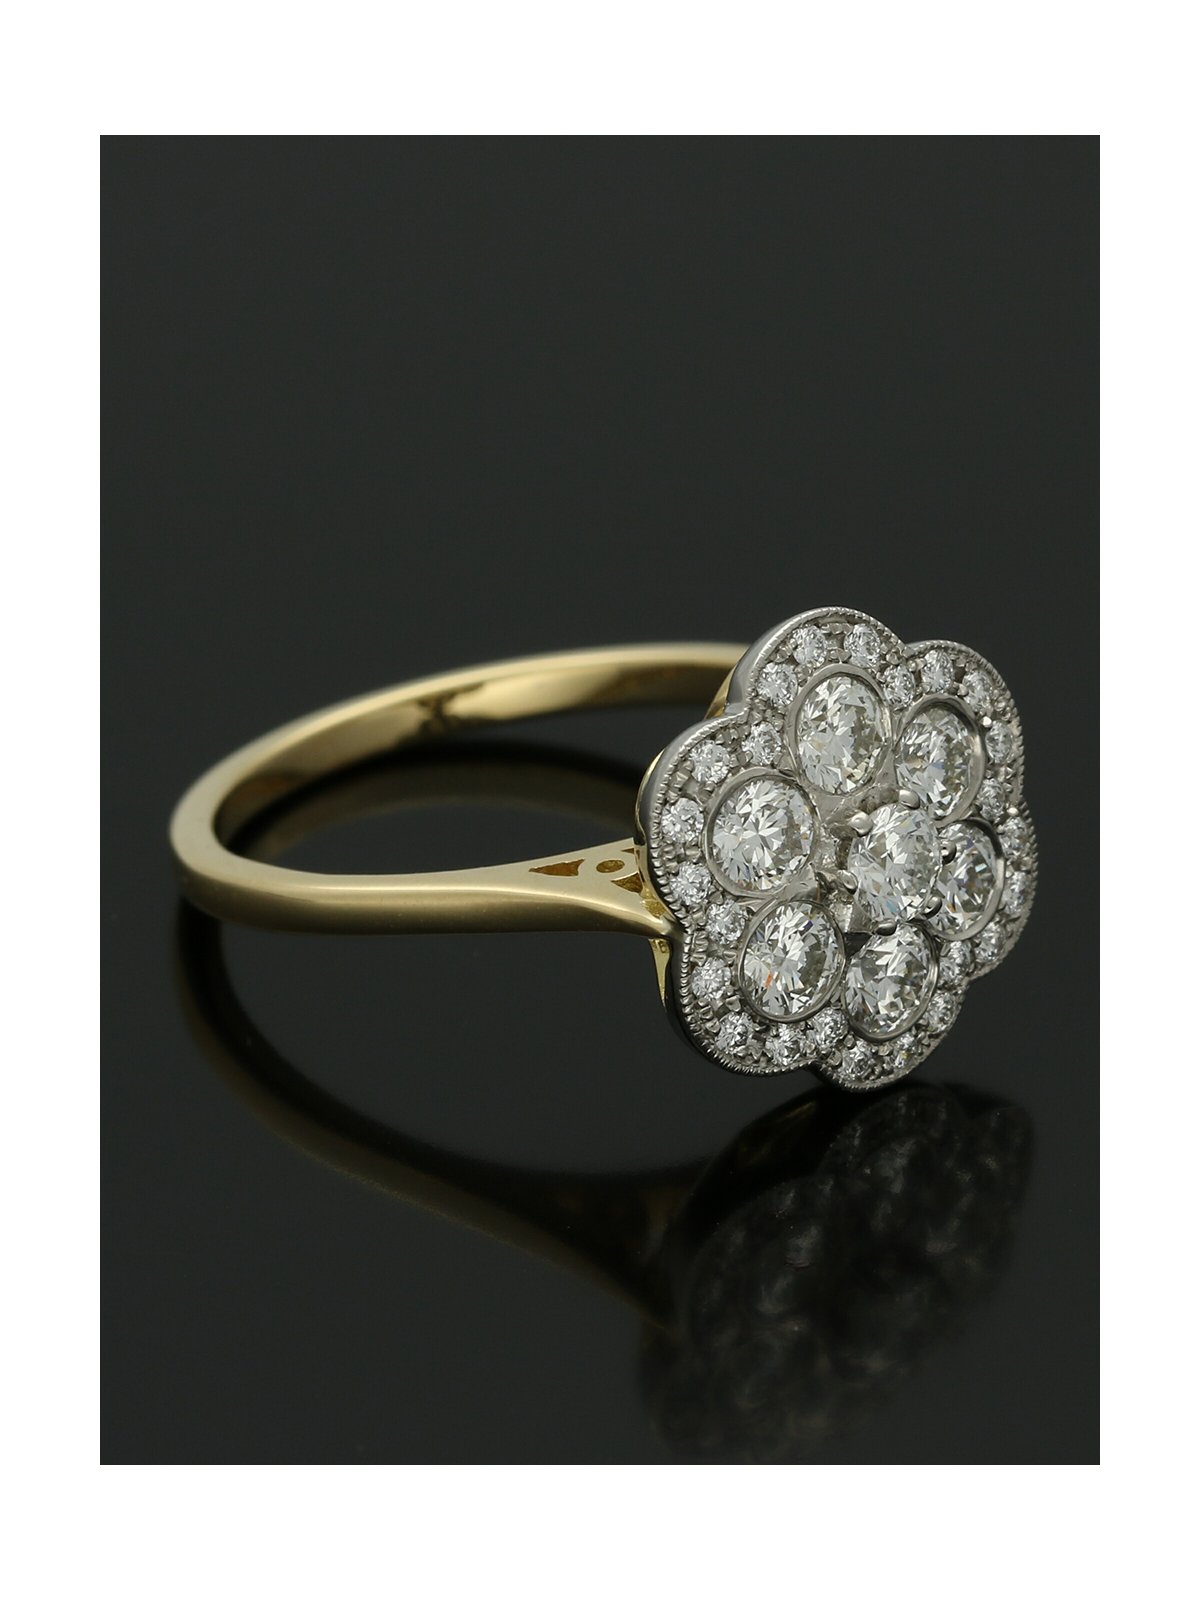 Diamond Cluster Ring 1.12ct  Round Brilliant Cut in 18ct Yellow Gold and Platinum